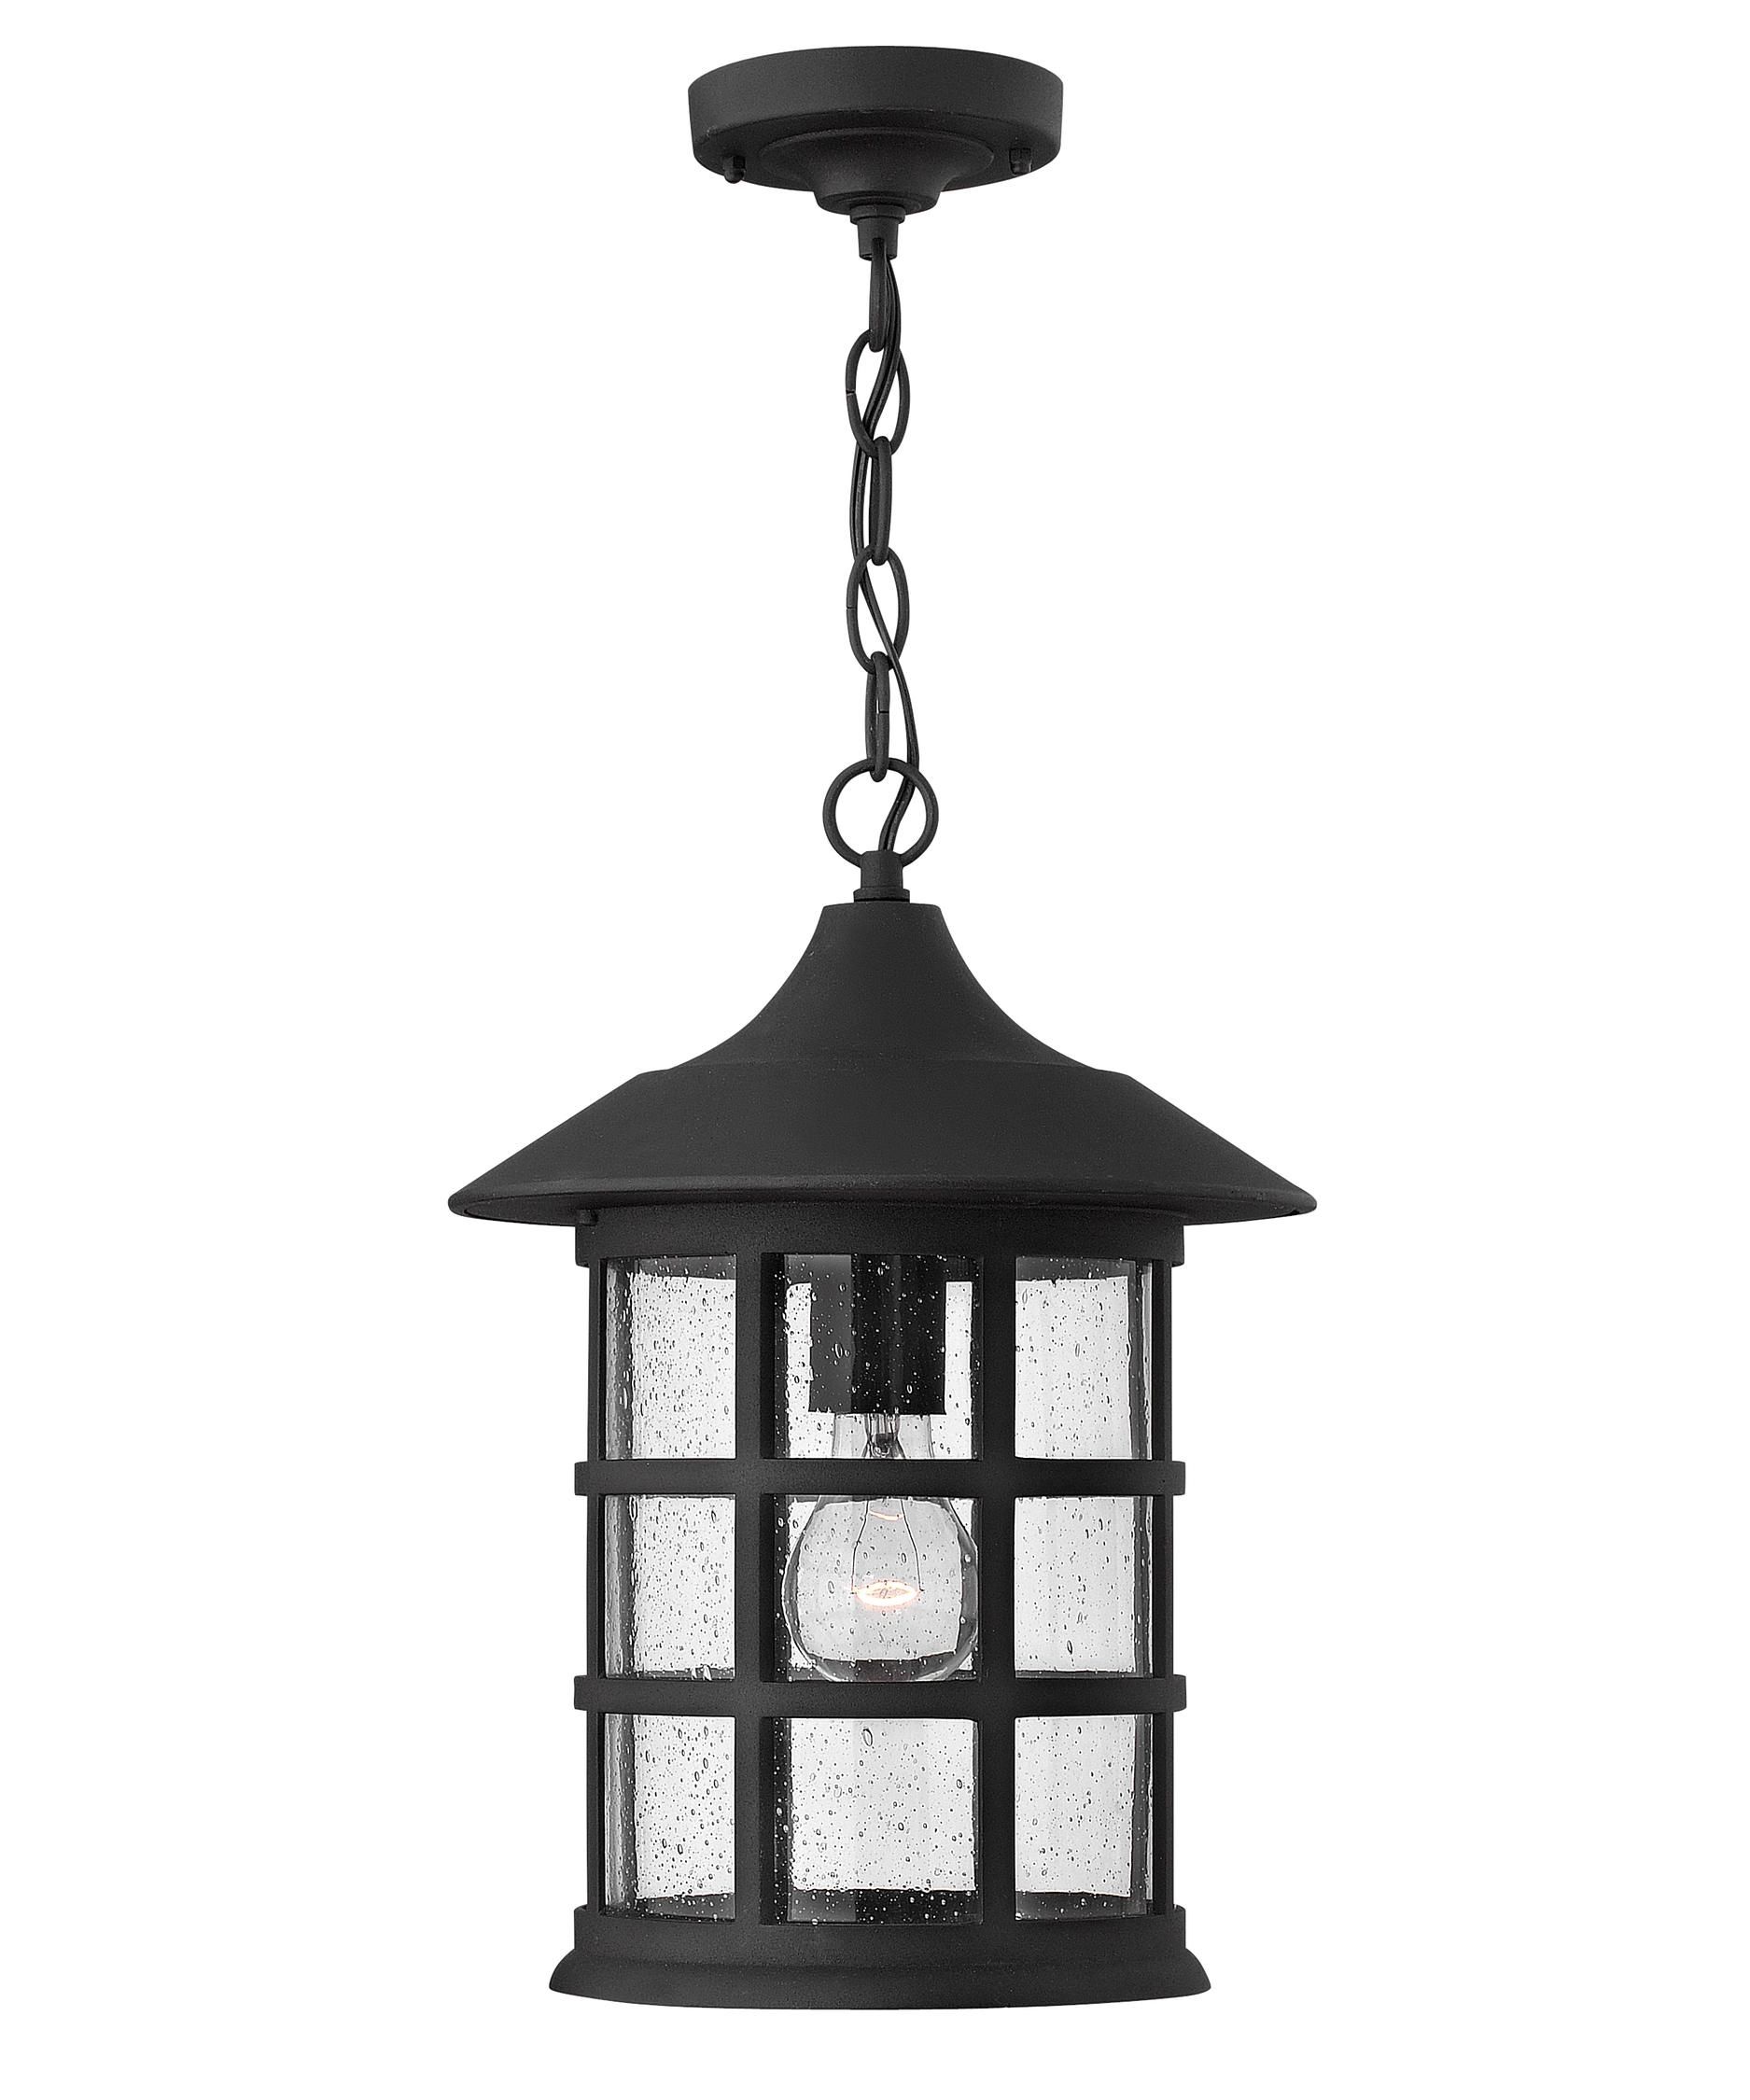 Hinkley Lighting 1802 Freeport 10 Inch Wide 1 Light Outdoor Hanging Pertaining To White Outdoor Hanging Lights (View 8 of 15)